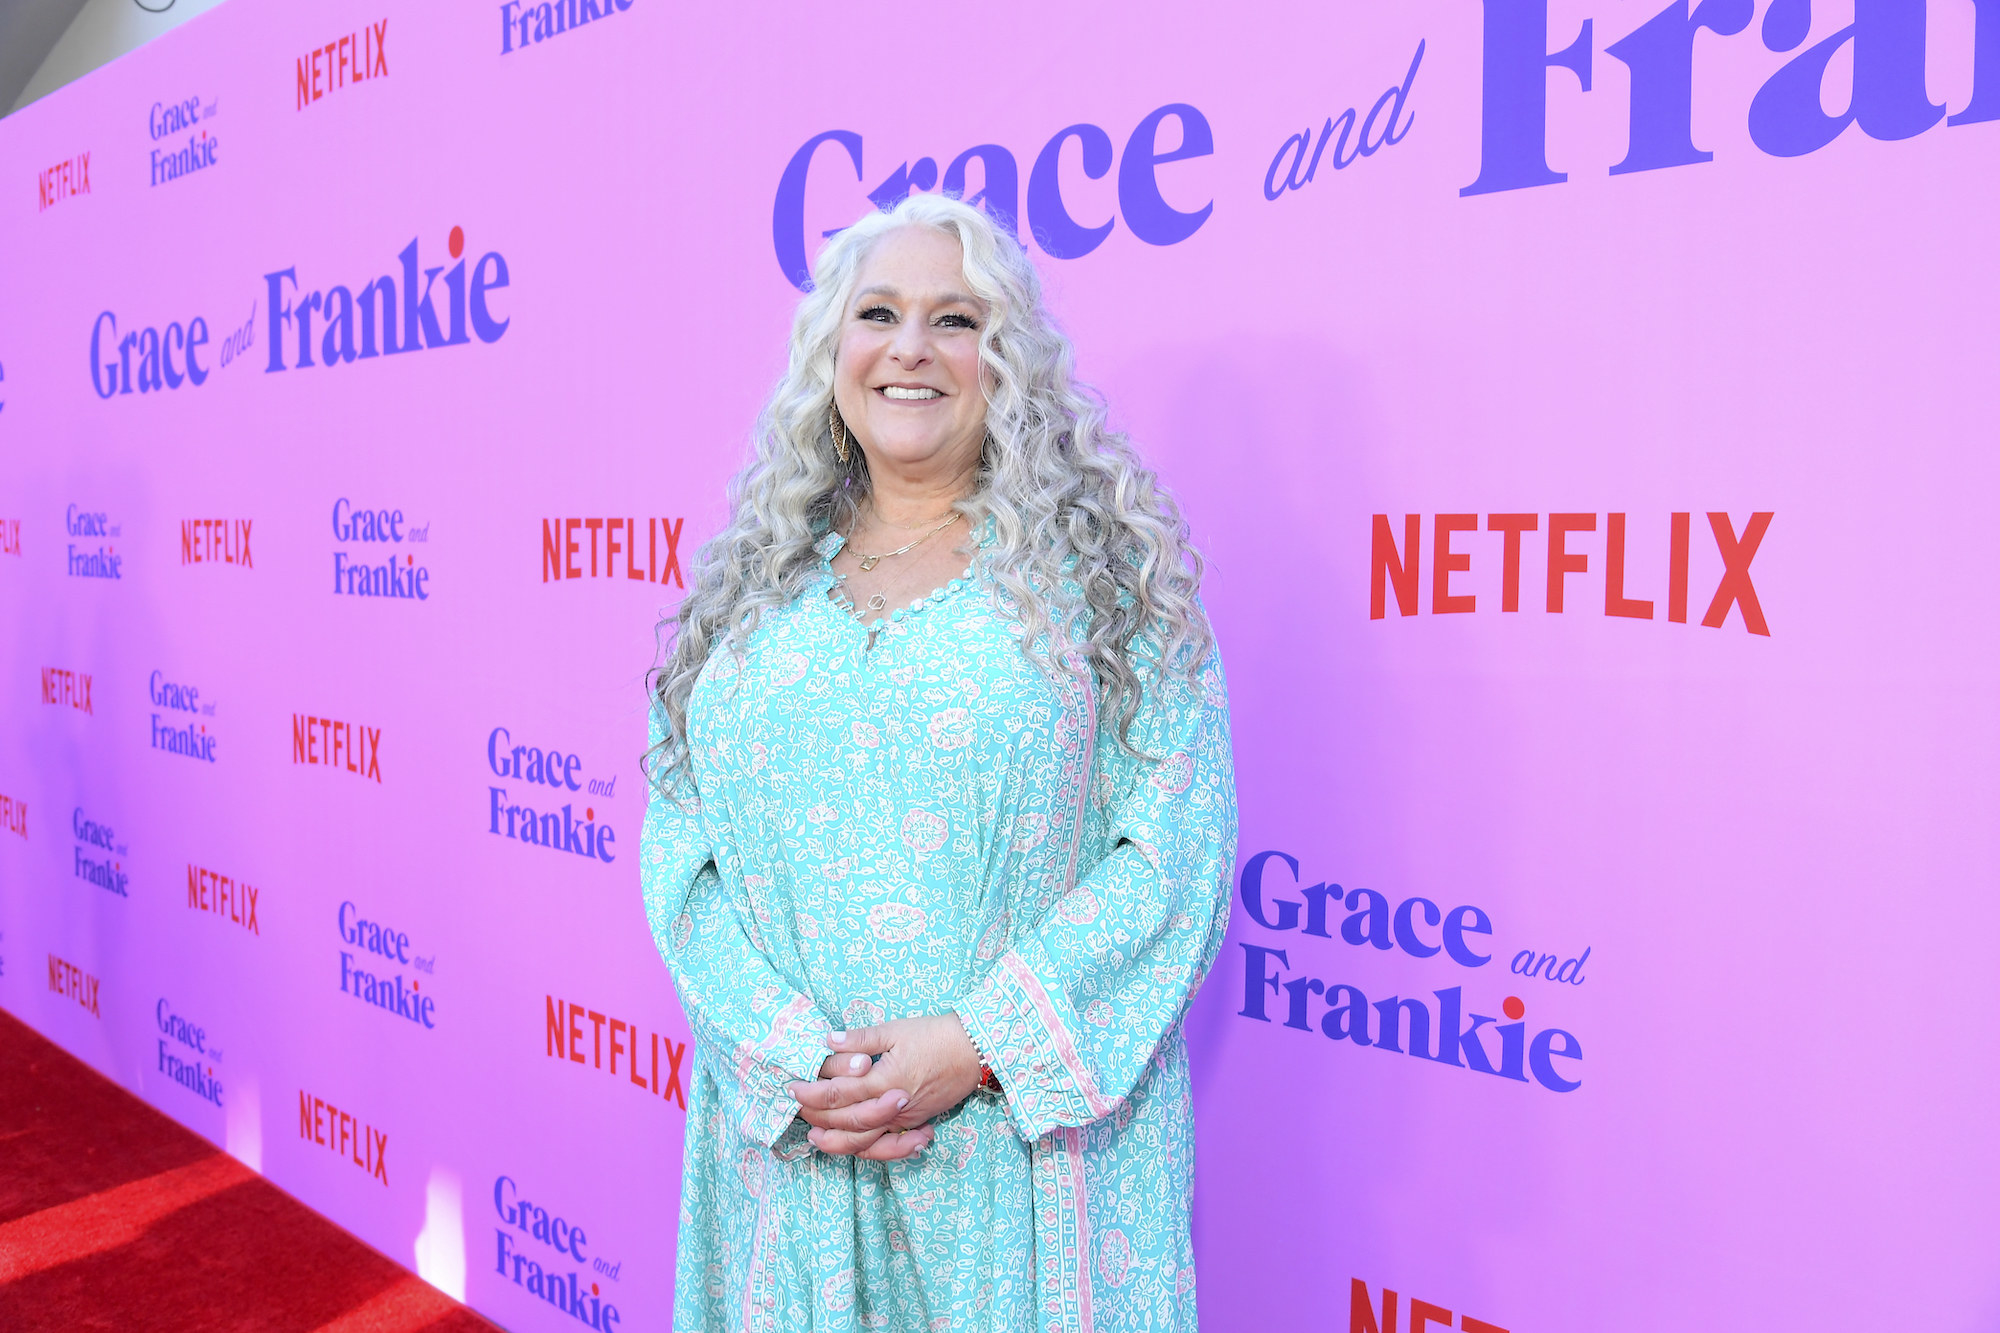 Marta standing on the red carpet for a Grace and Frankie event